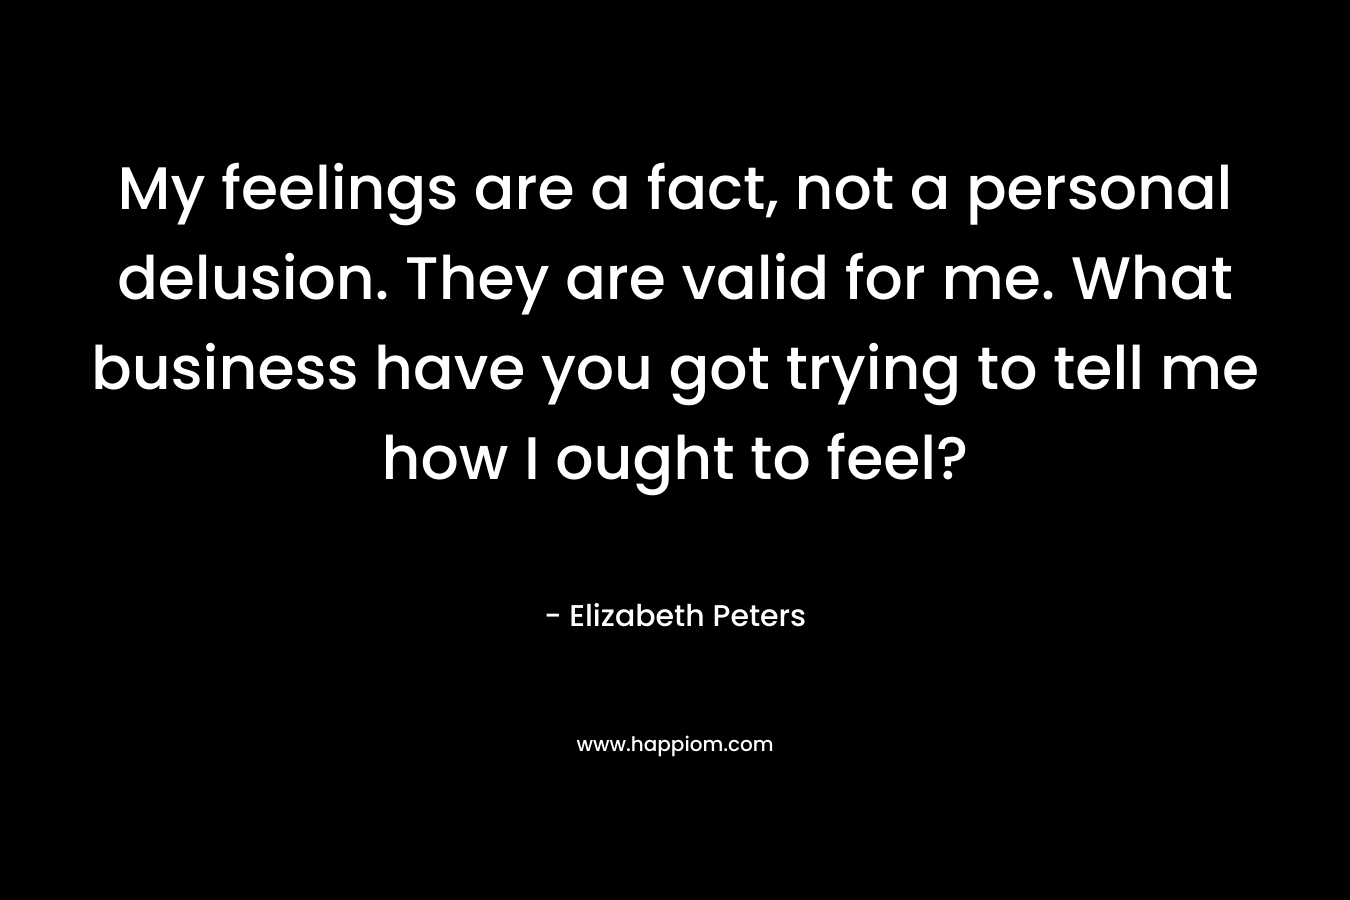 My feelings are a fact, not a personal delusion. They are valid for me. What business have you got trying to tell me how I ought to feel? – Elizabeth Peters